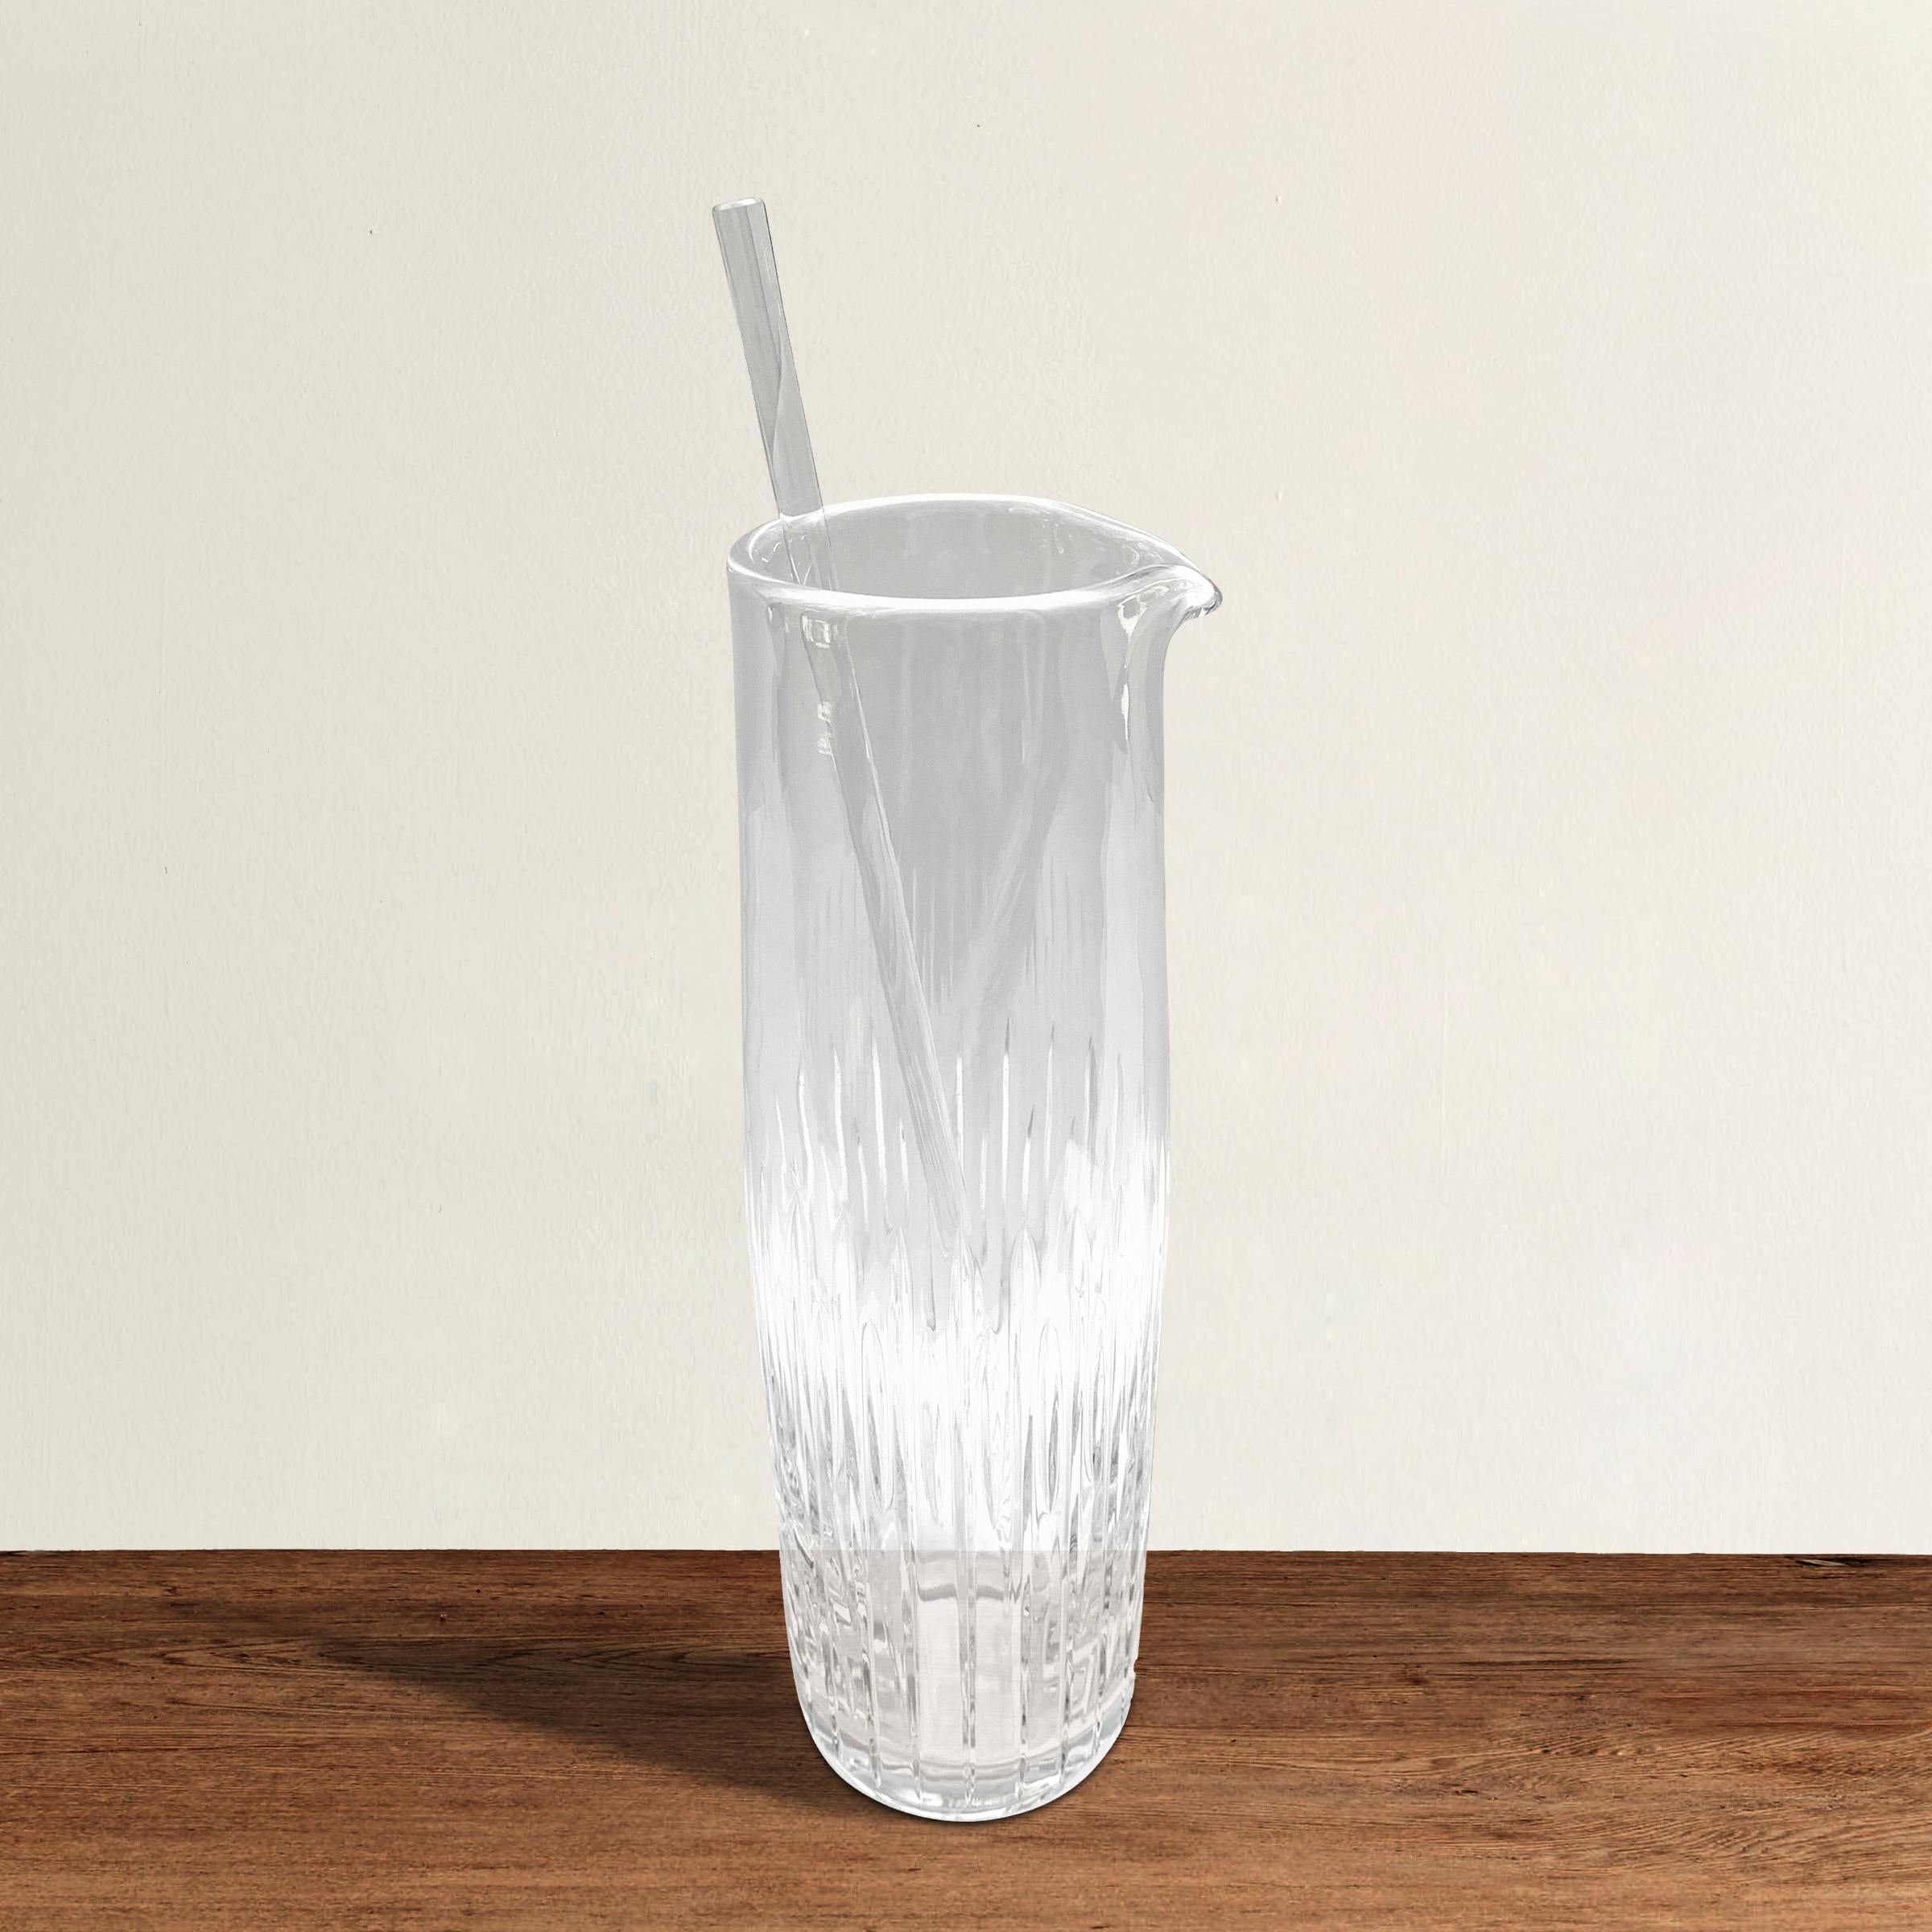 A beautiful vintage cut crystal cocktail pitcher with a beautiful elongated form with cut sides and a crystal stir stick. Marked, 